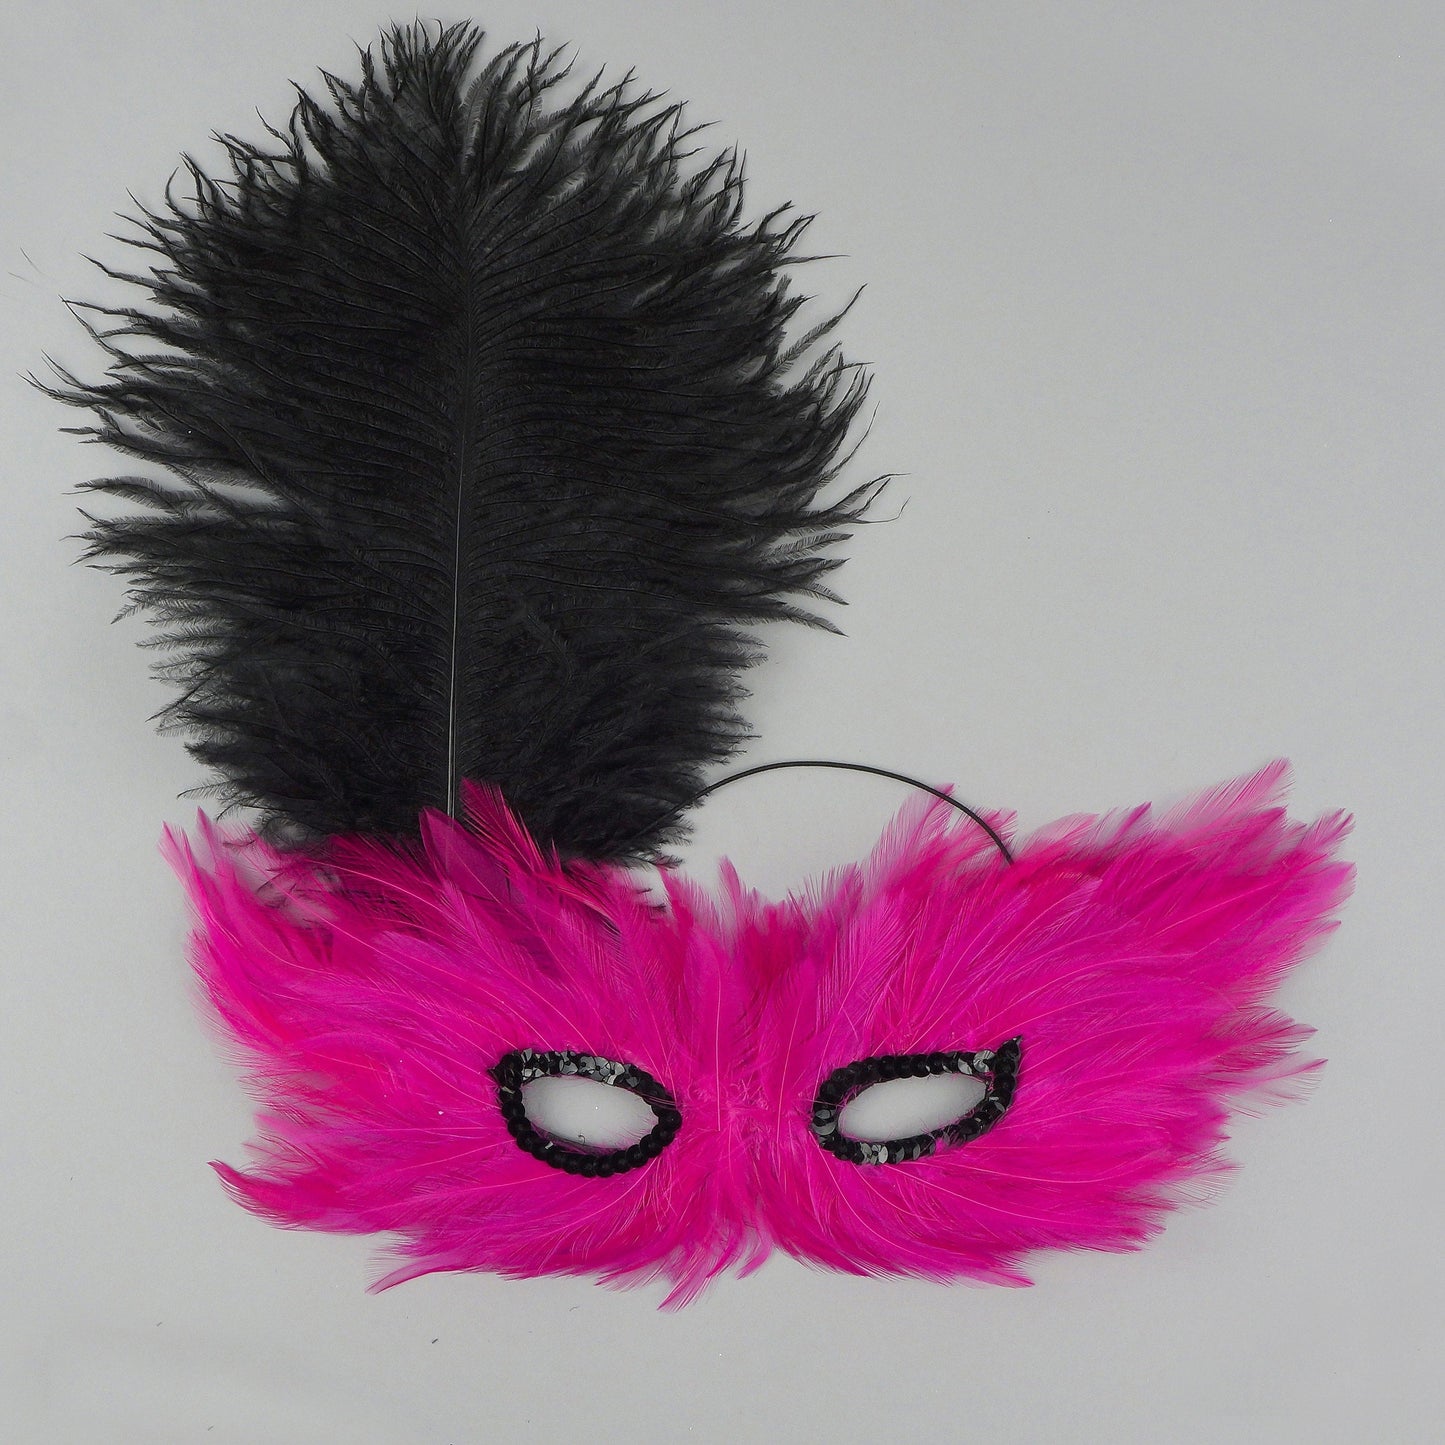 Ostrich Feathers 9-12" Drabs -  Black